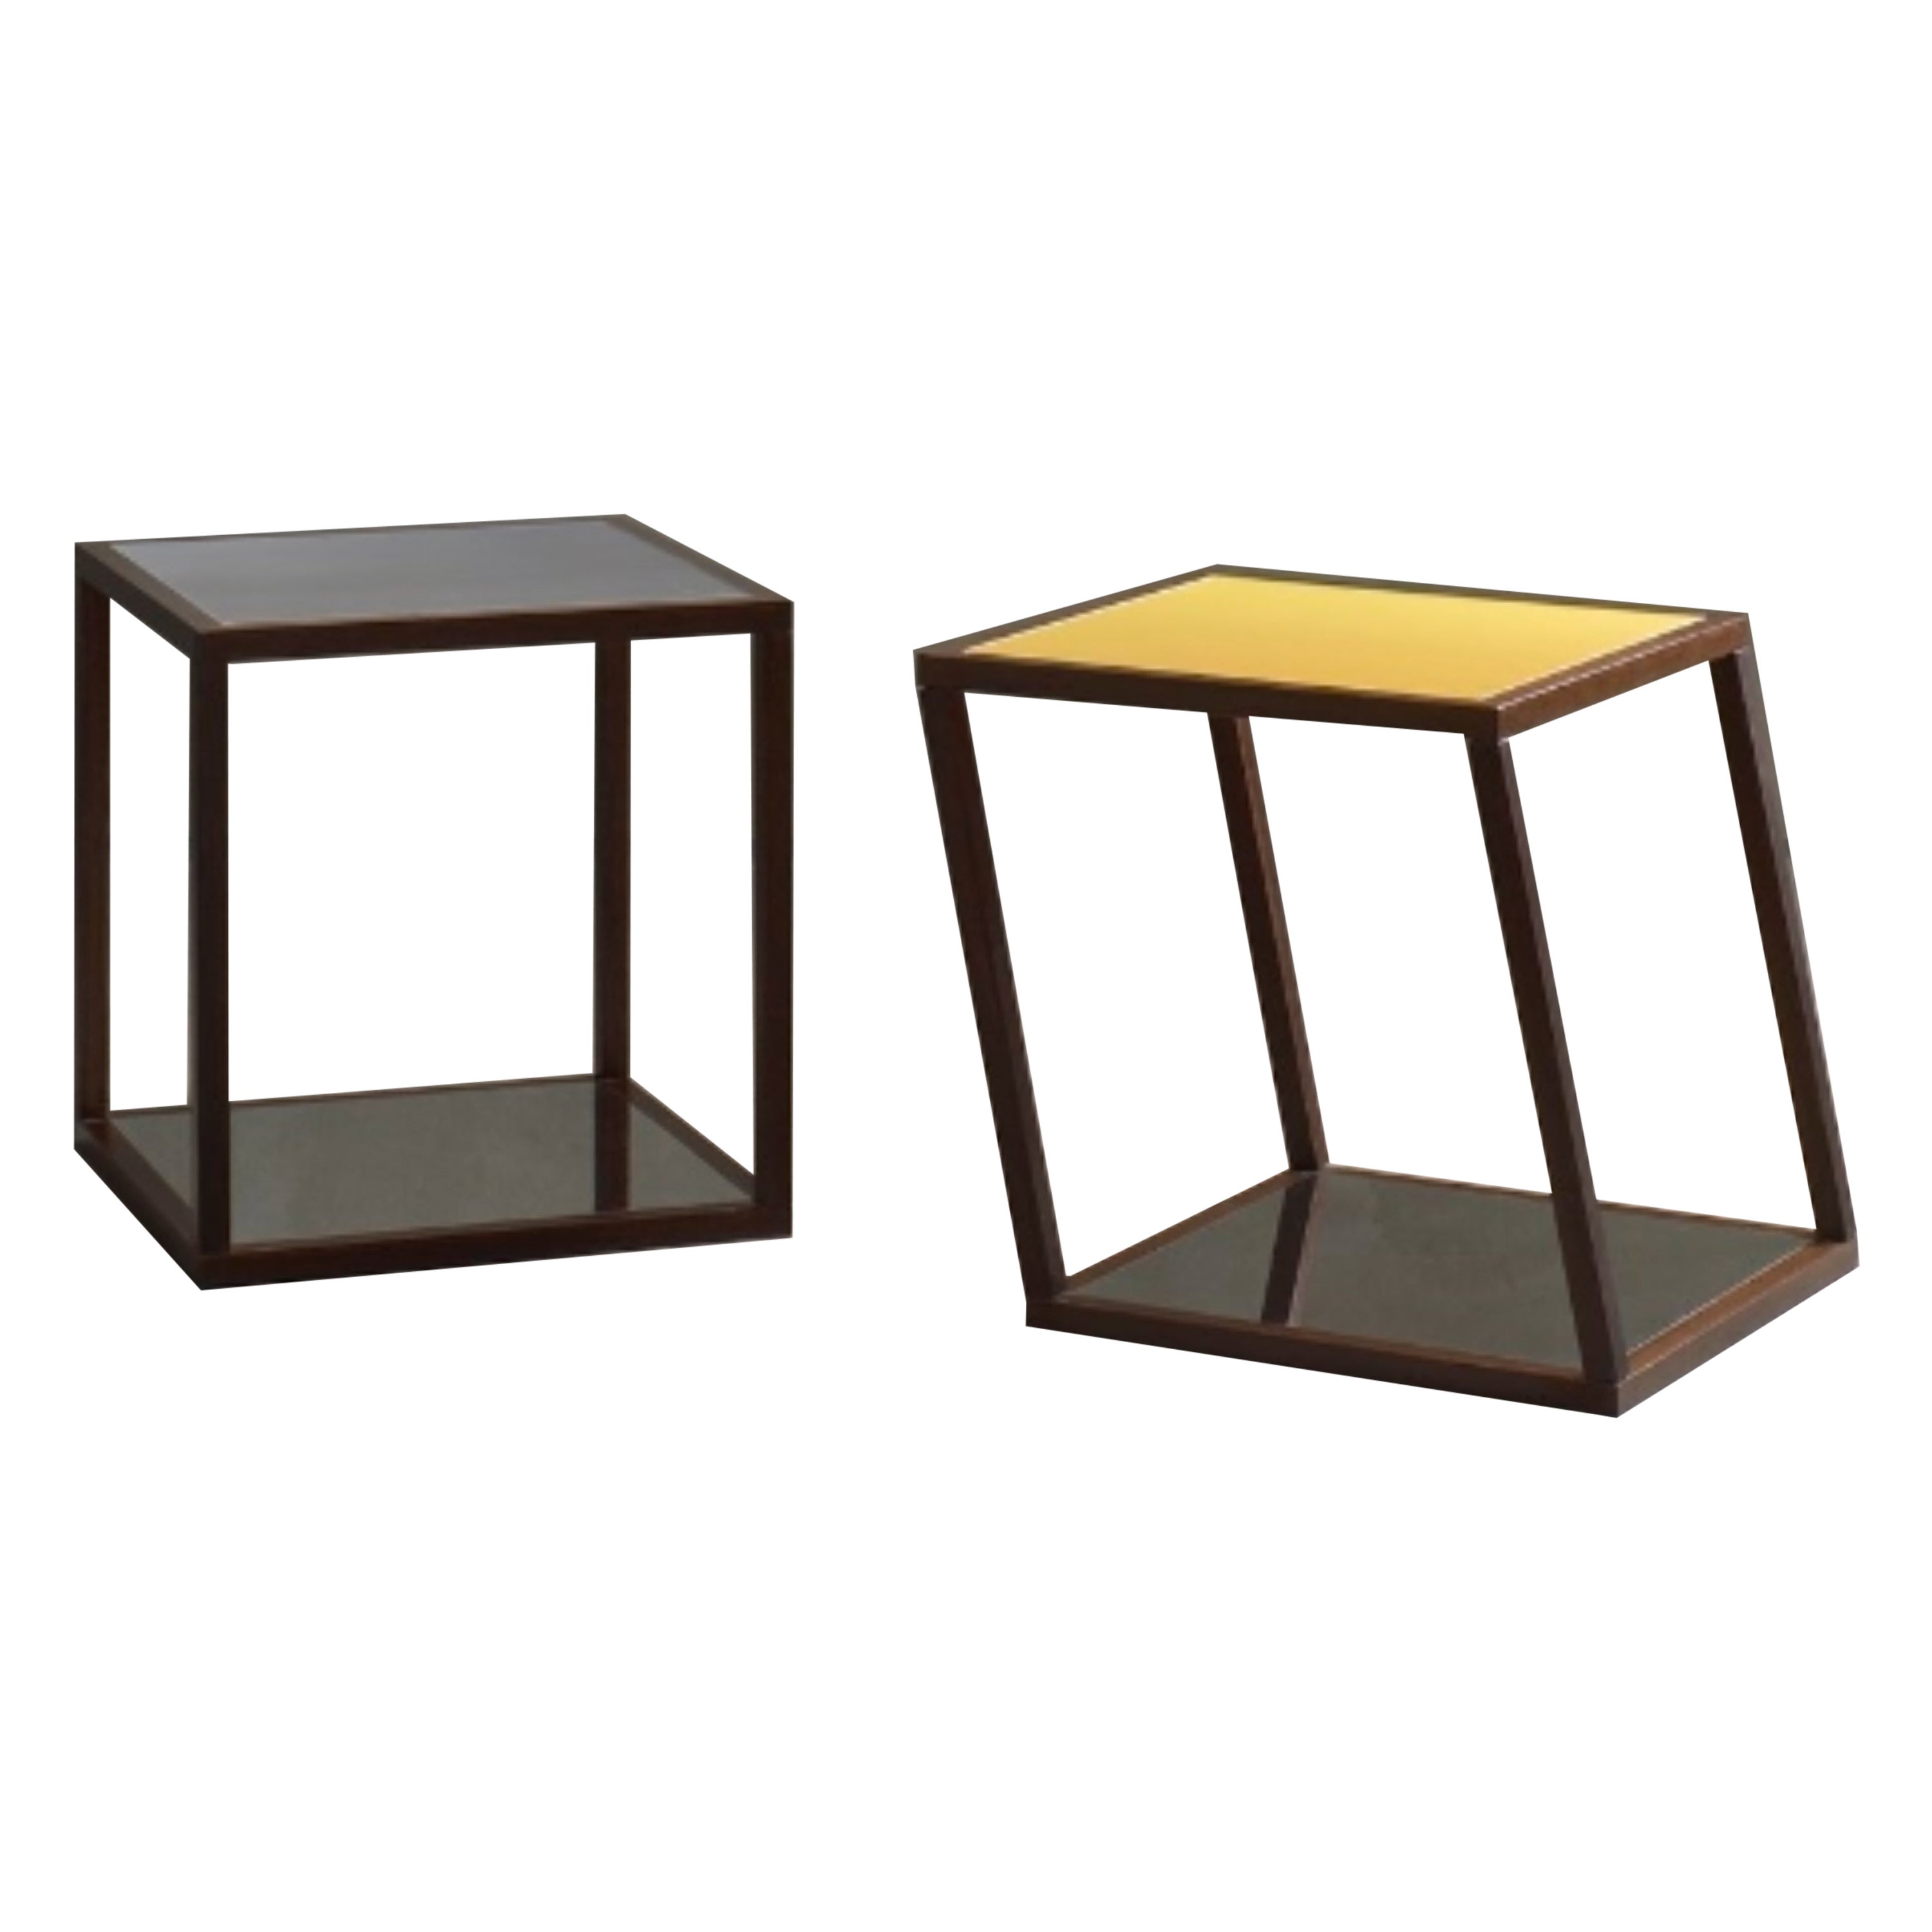 Set of 2 Cf Lt07.5 Low Tables by Caturegli Formica For Sale